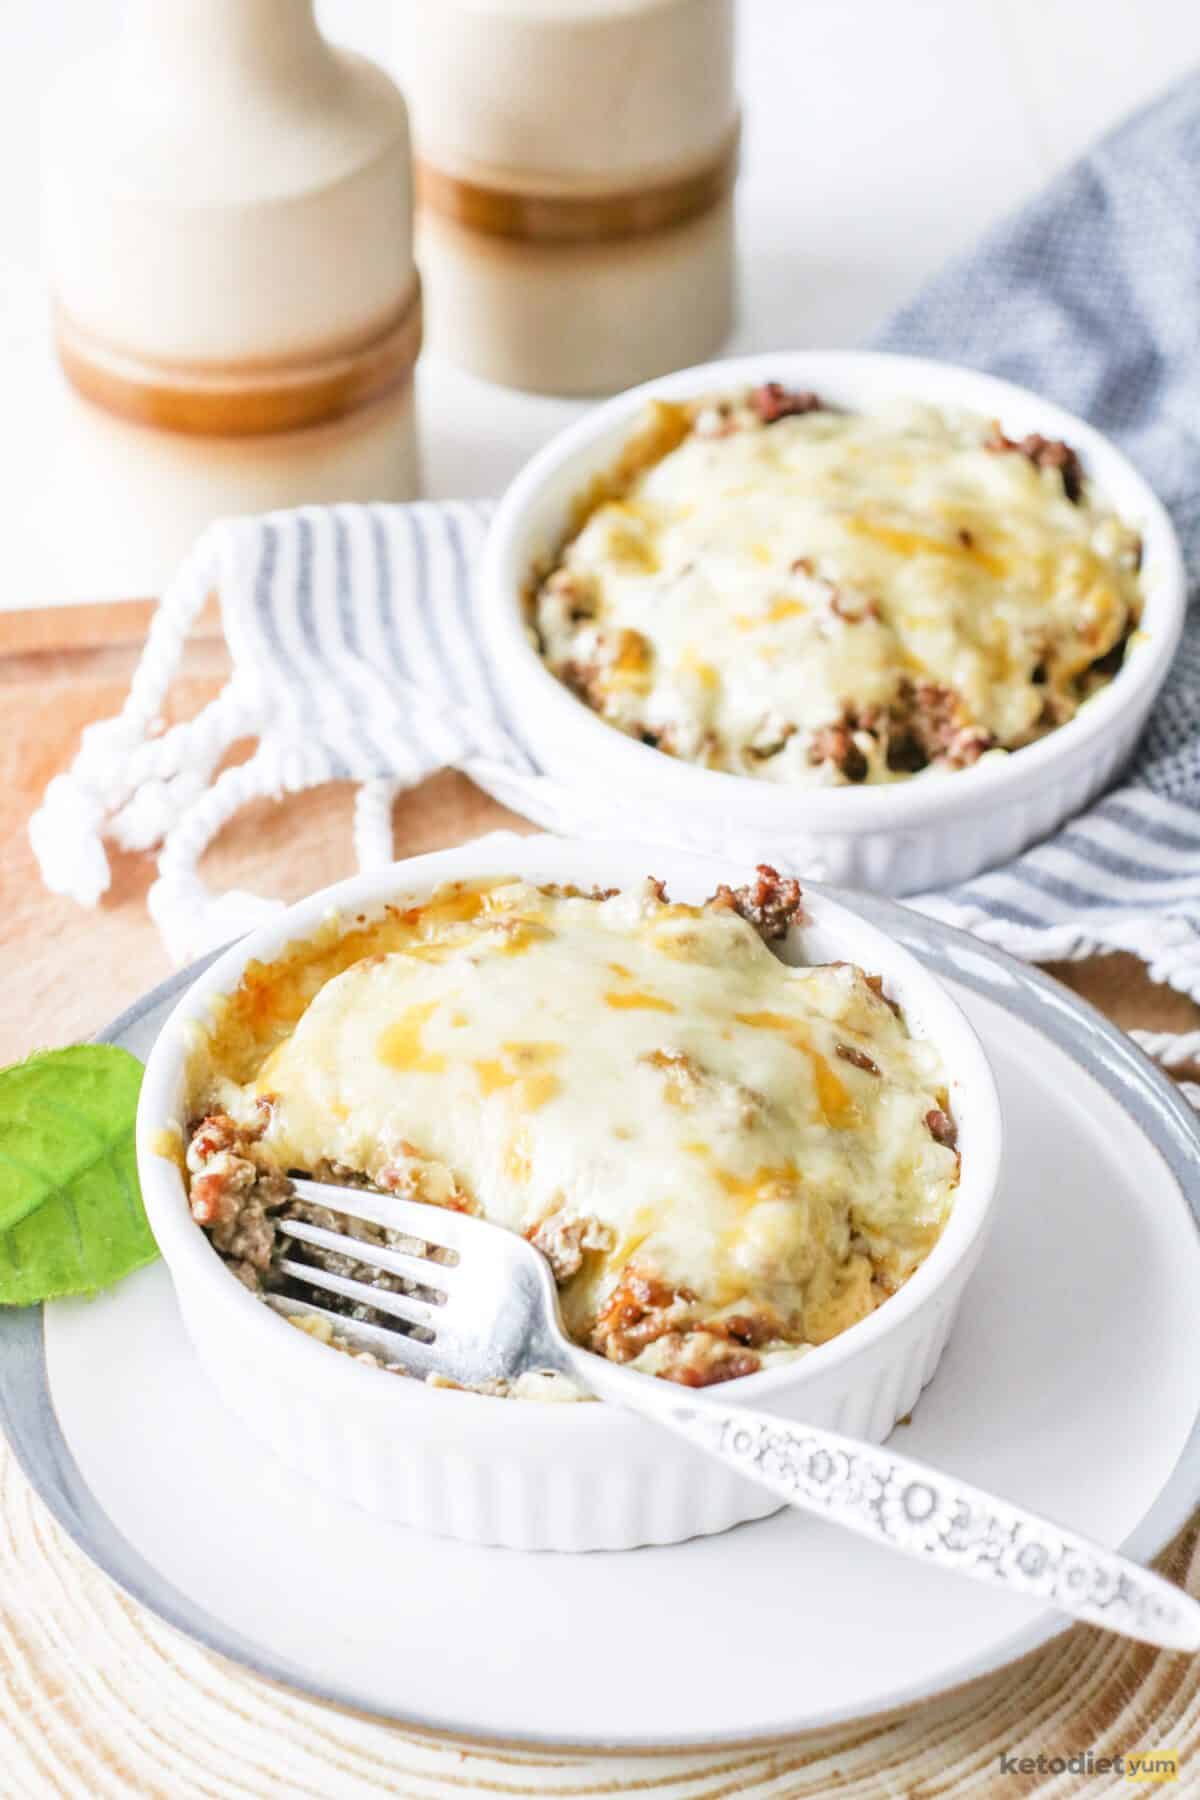 Delicious mini keto cheeseburger pies served in small baking trays topped with golden cheese